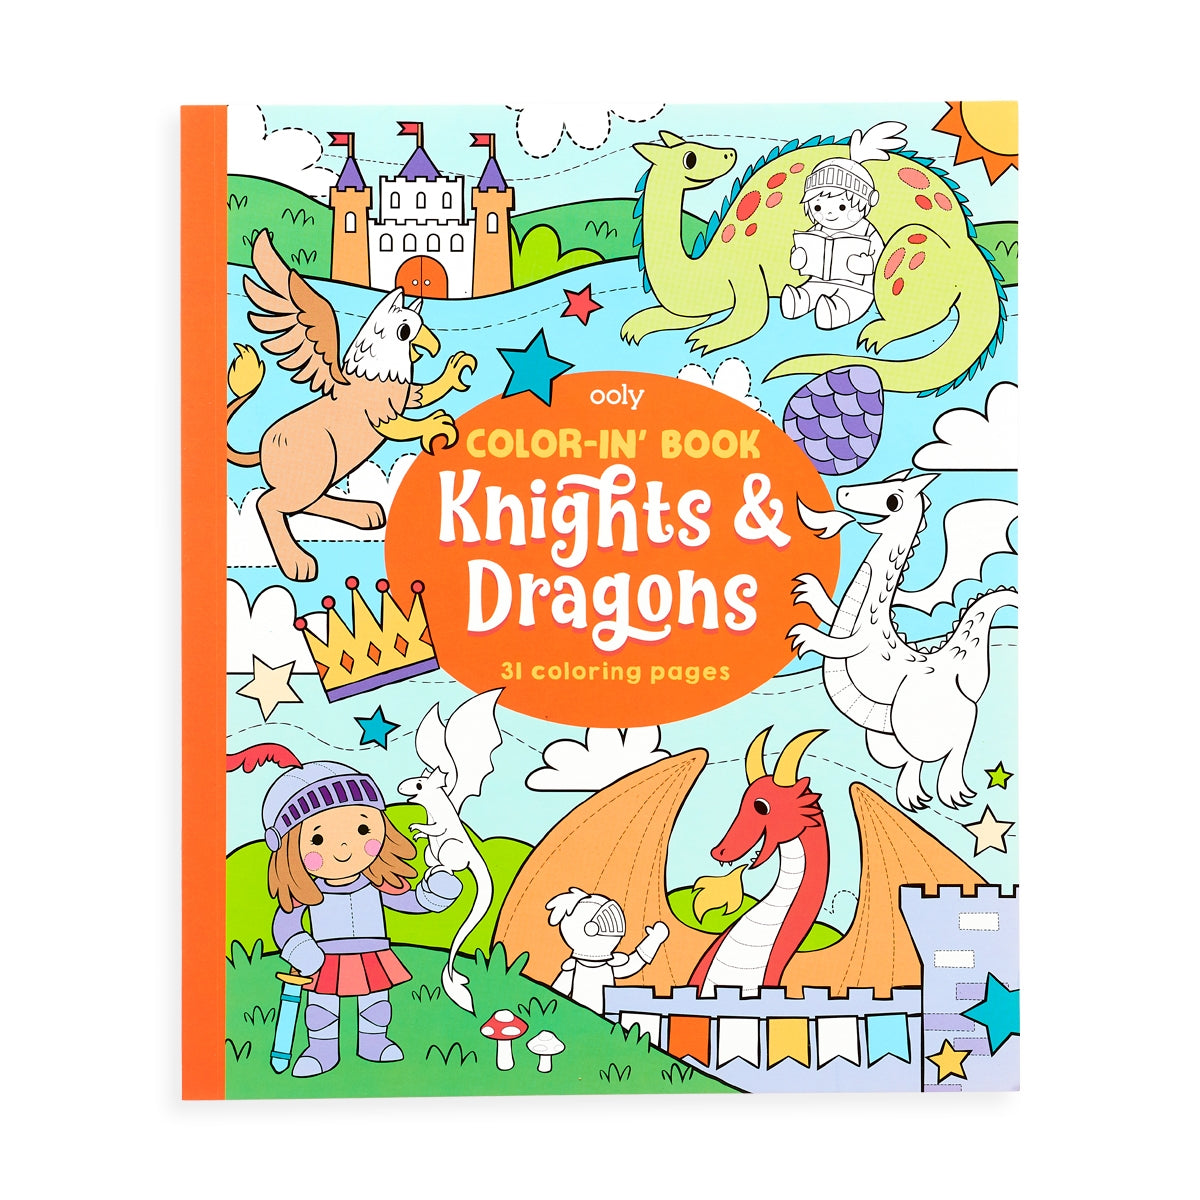 Color-in' Book : Knights & Dragon